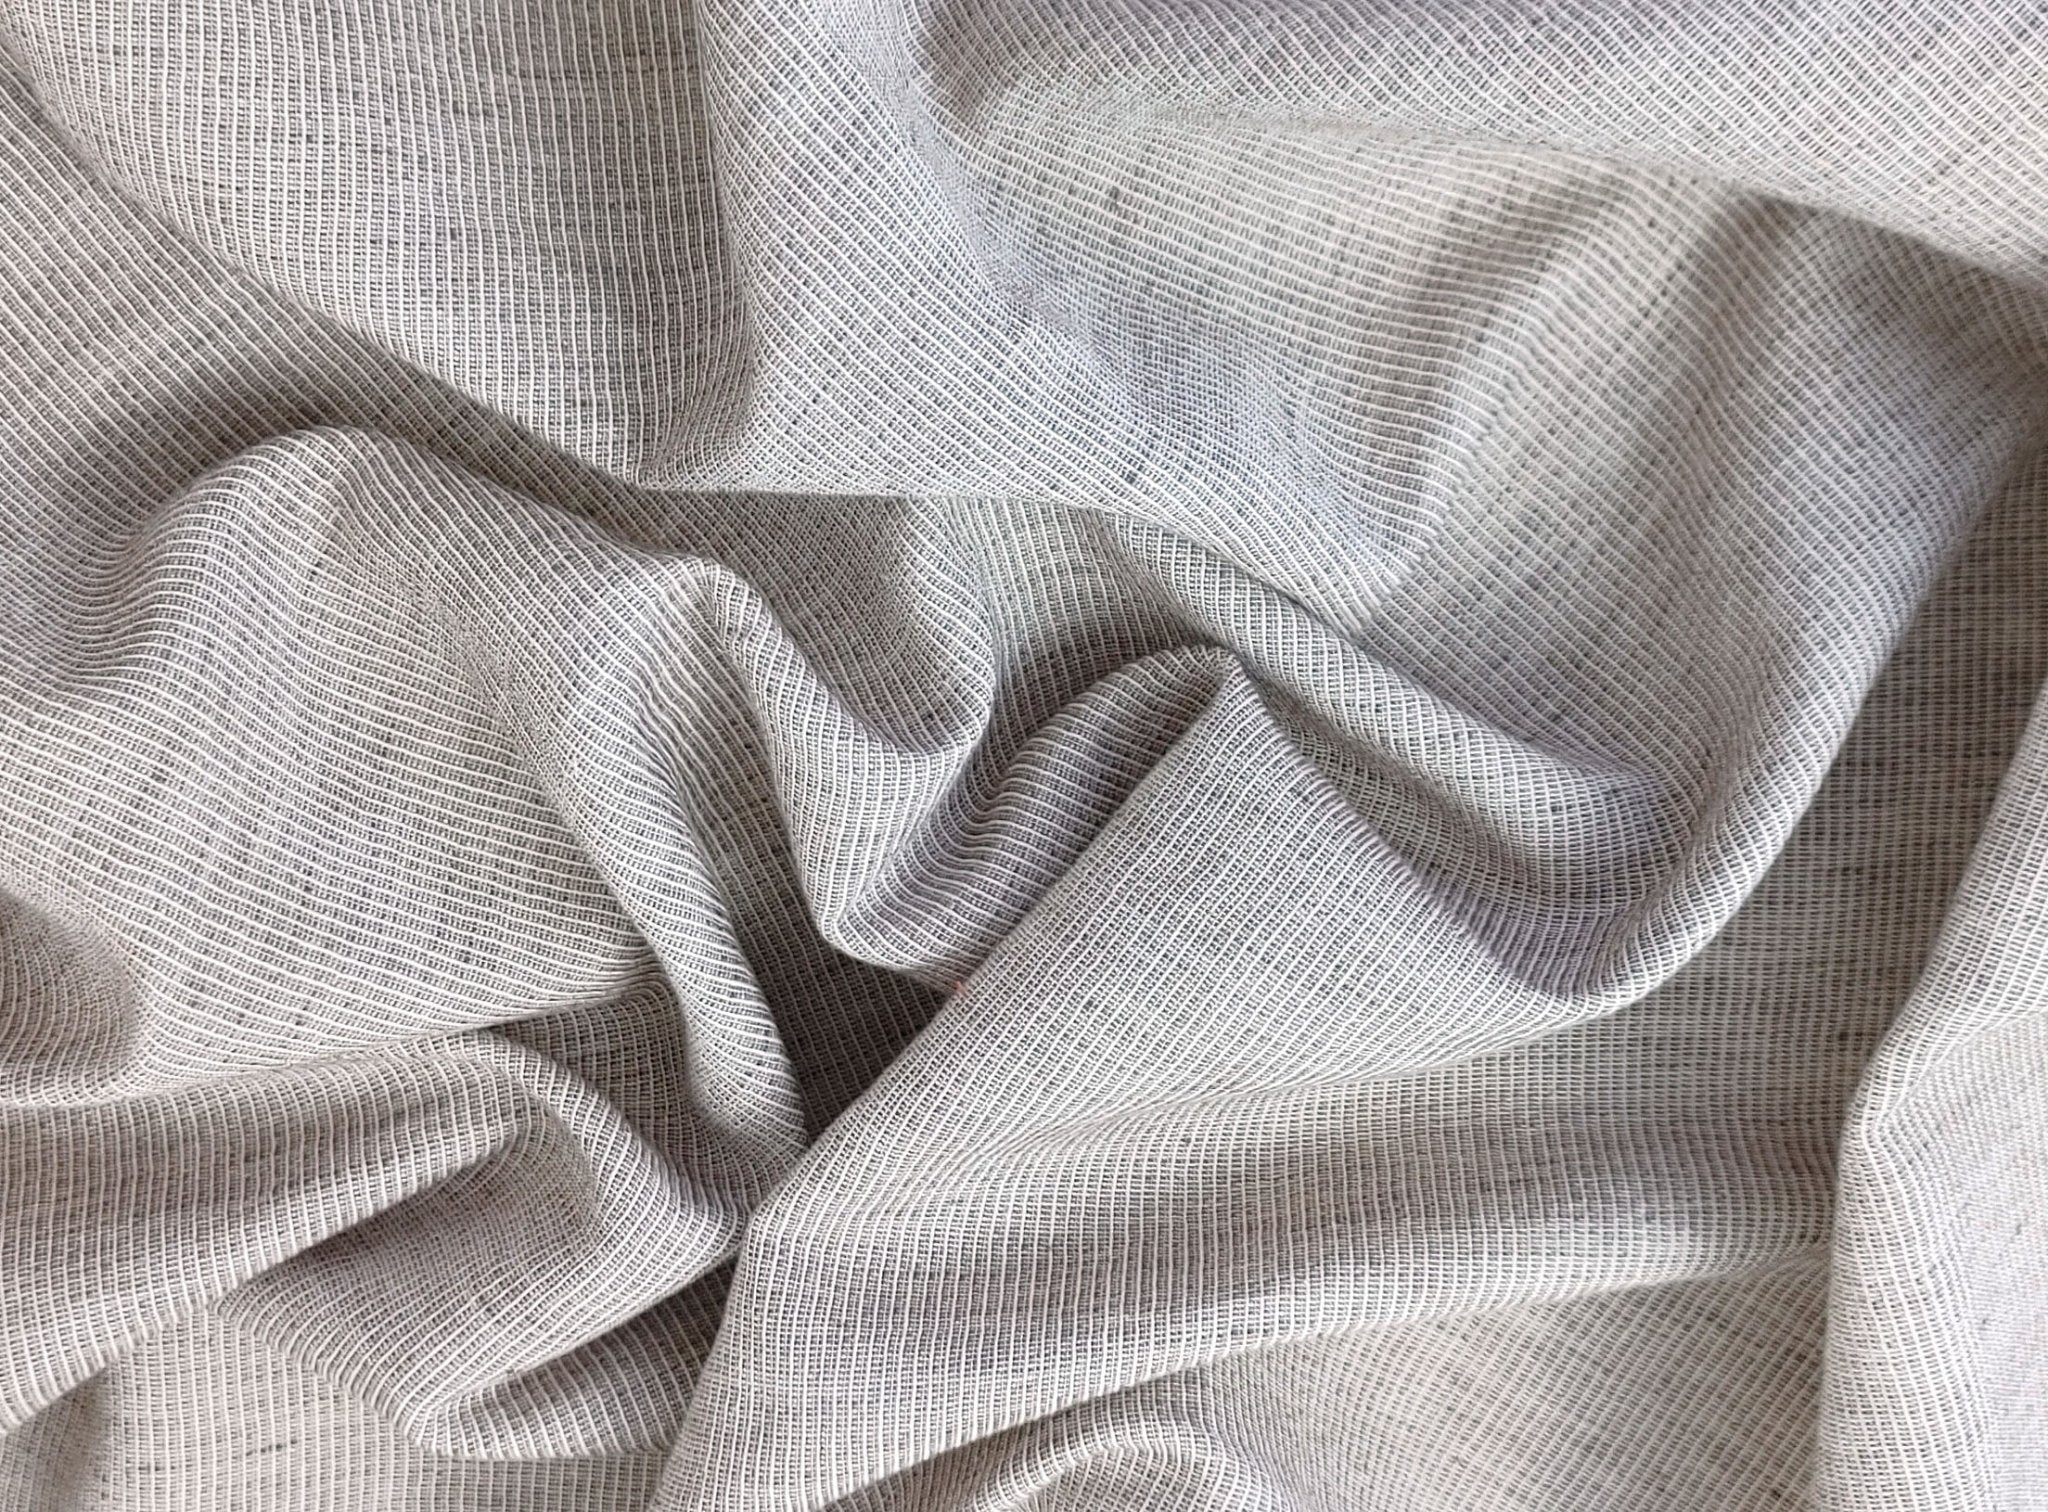 Light Weight Linen Cotton Stripe Fabric with Subtle Wrinkle Effect 7790 7791 7792 7793 7794 - The Linen Lab - Brown